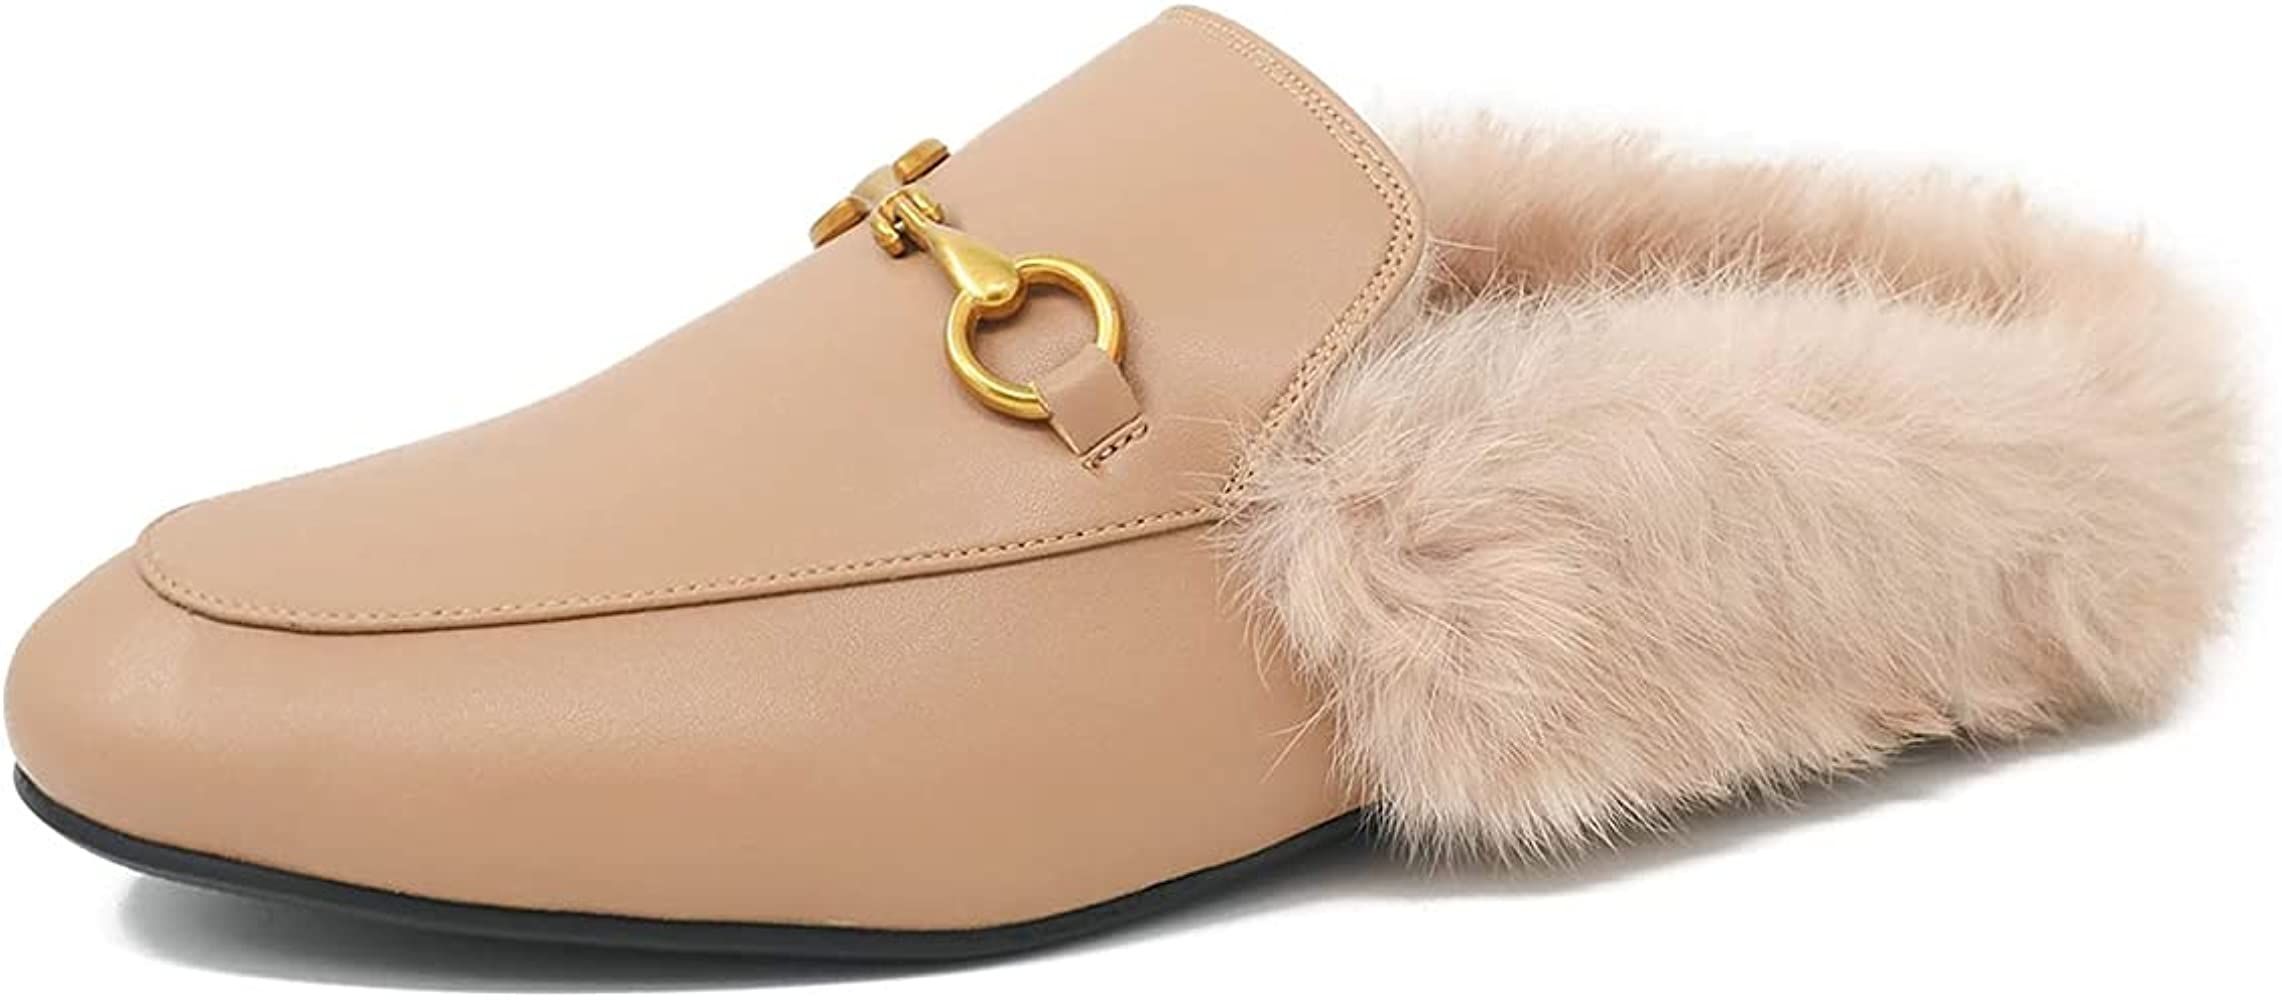 Arqa Fur Mules for Women Chain Leather Low Heel Mule Fluffy Comfort Loafers Casual Slip-on Flat Shoe | Amazon (US)